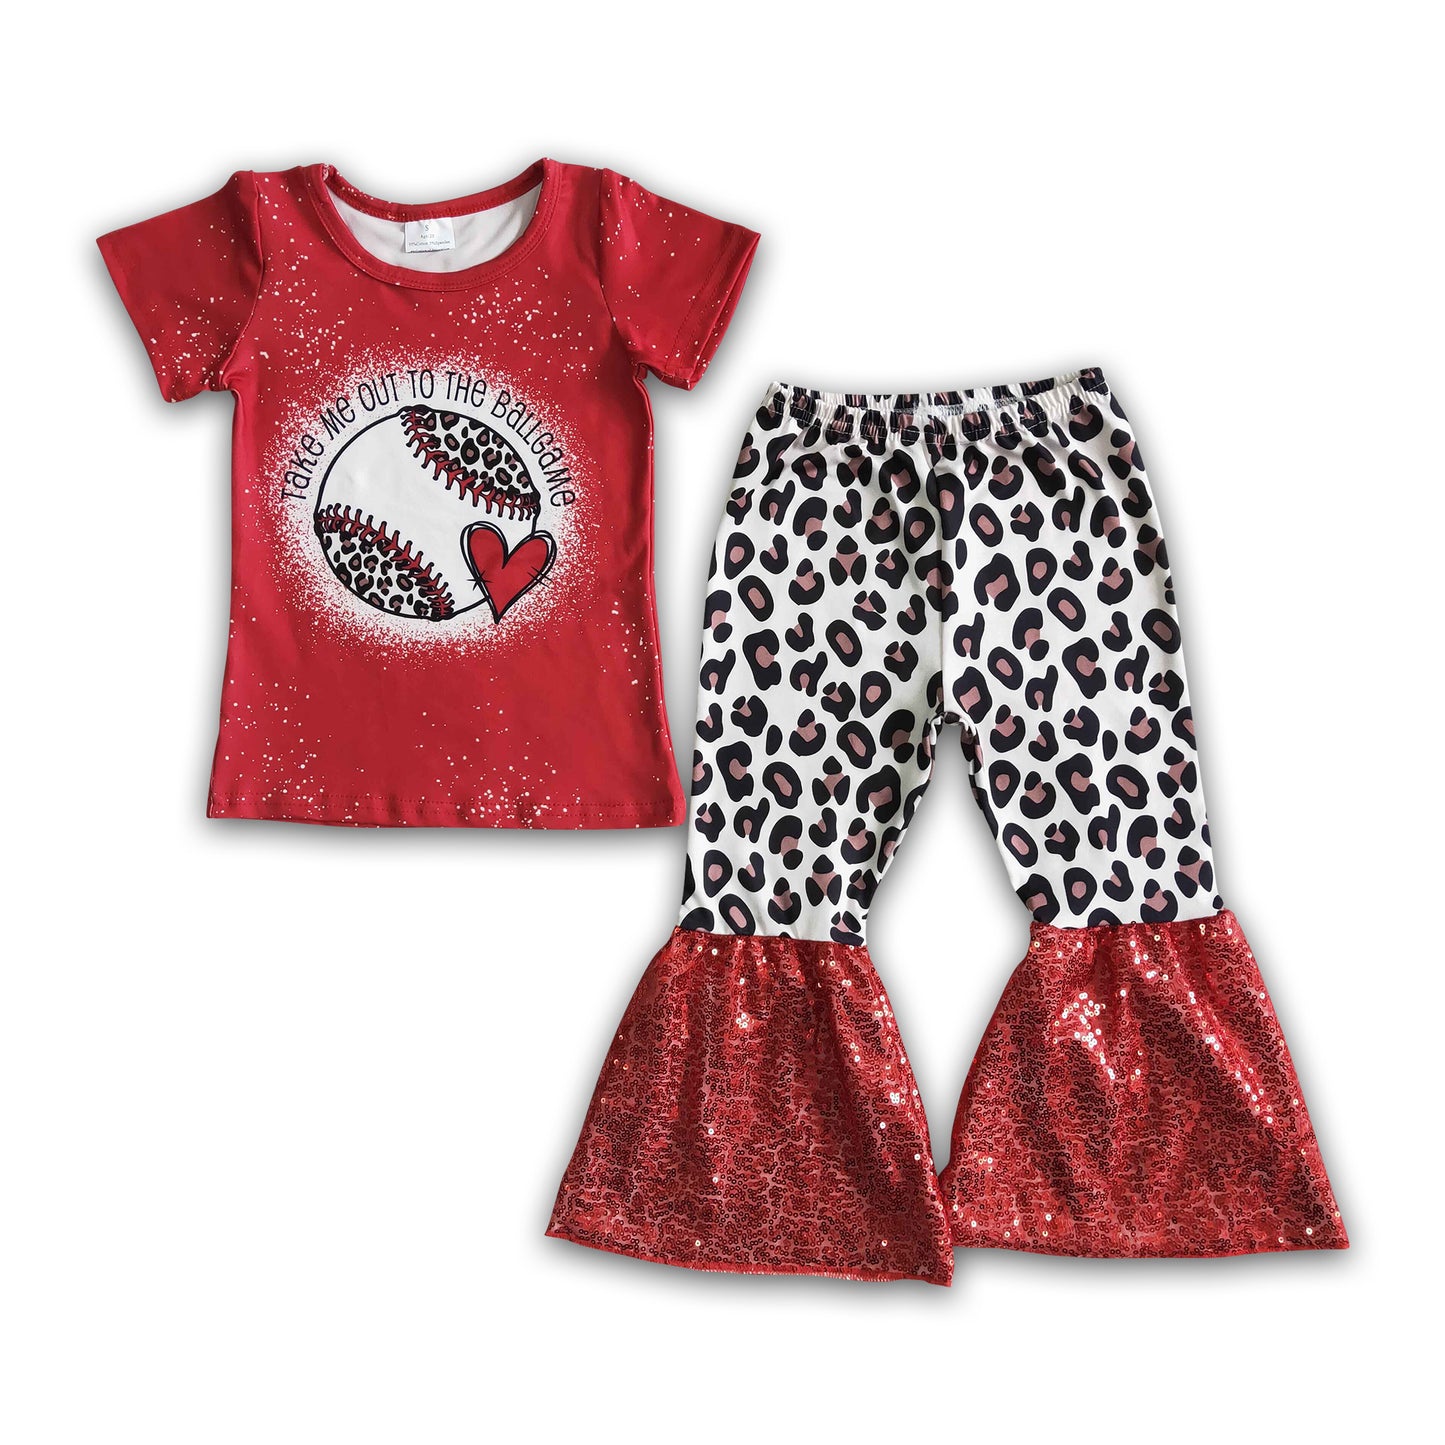 Take me out to the ballgame shirt leopard sequin pants girls baseball clothes